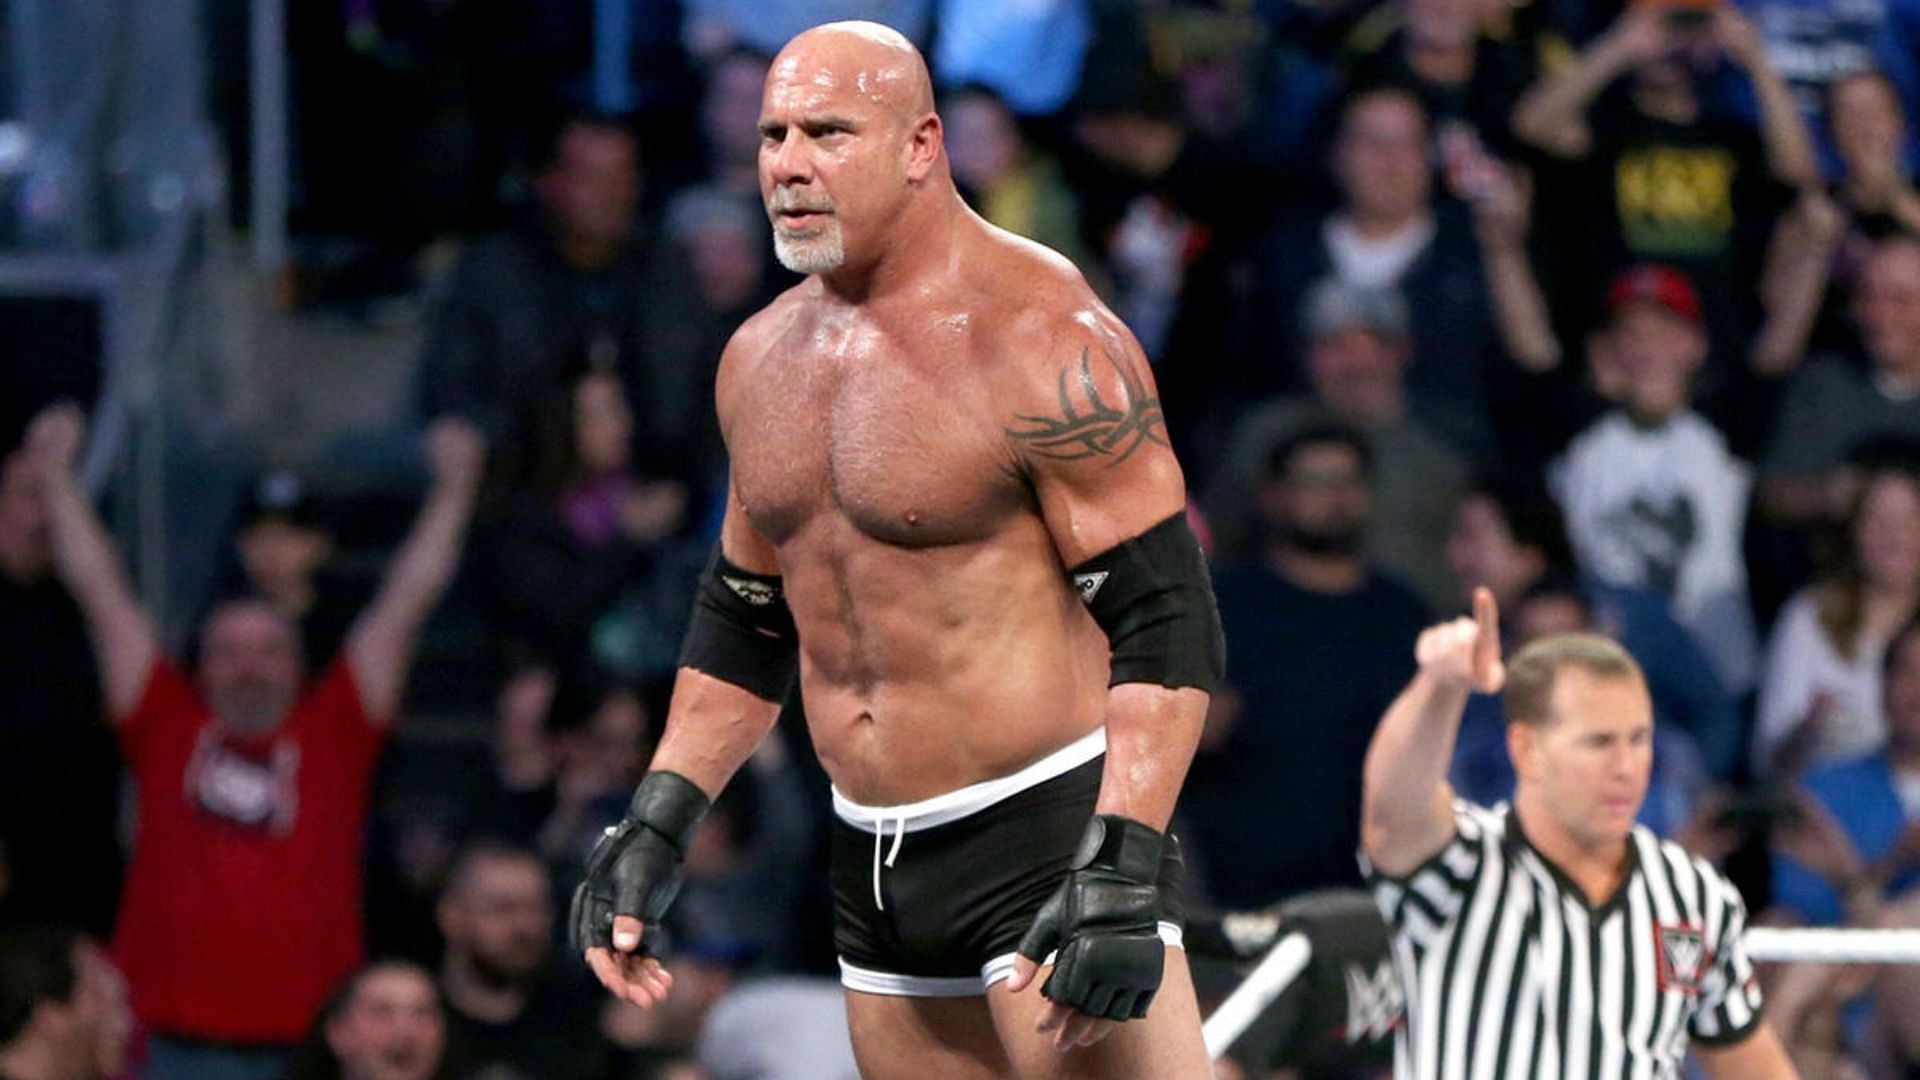 Goldberg was a force to be reckoned with